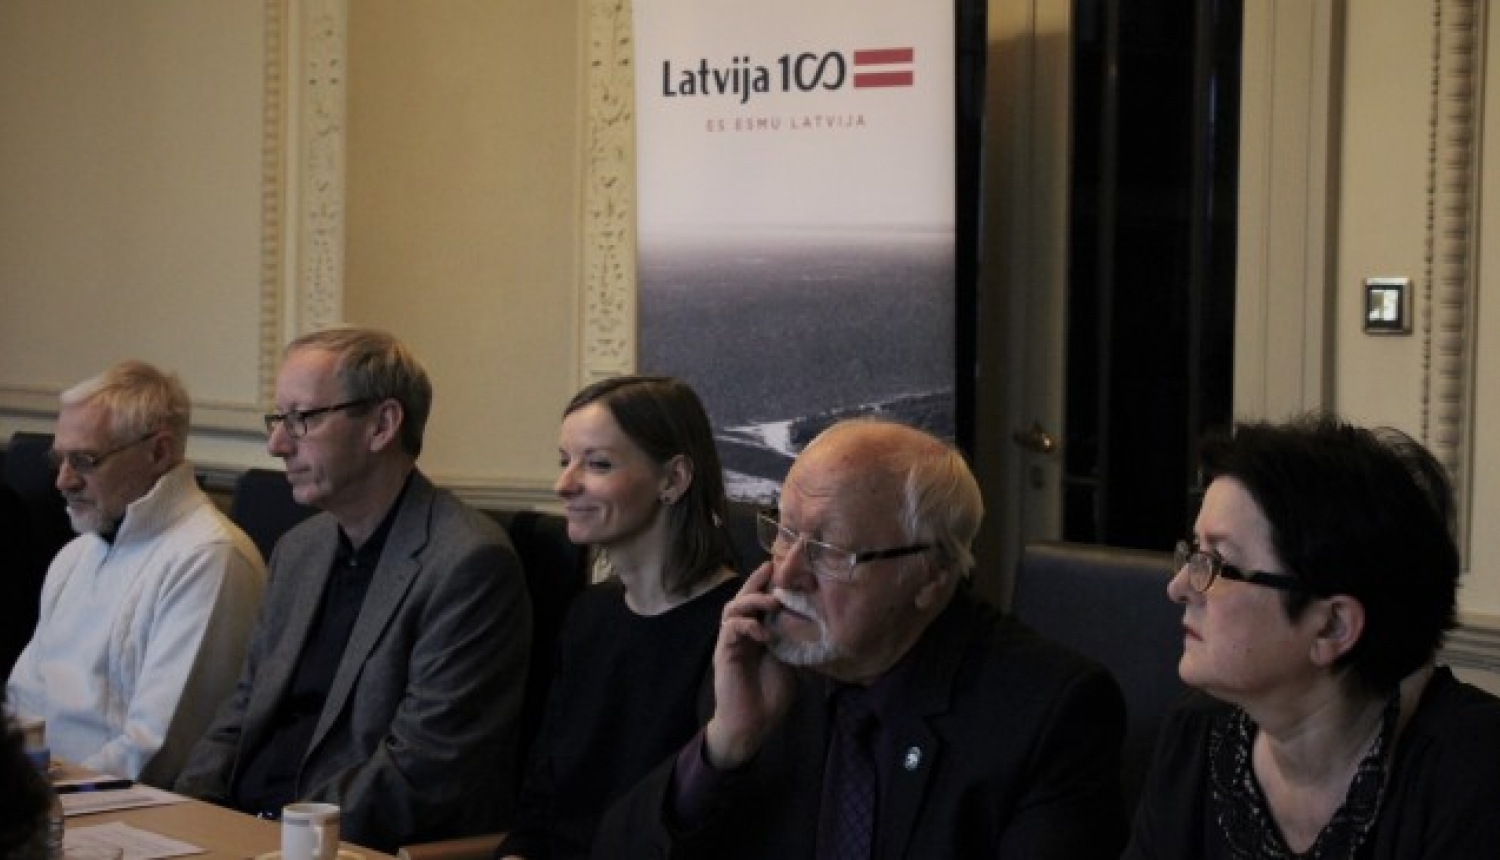 The call for applications “Latvian Films for Latvia’s Centennial” concluded